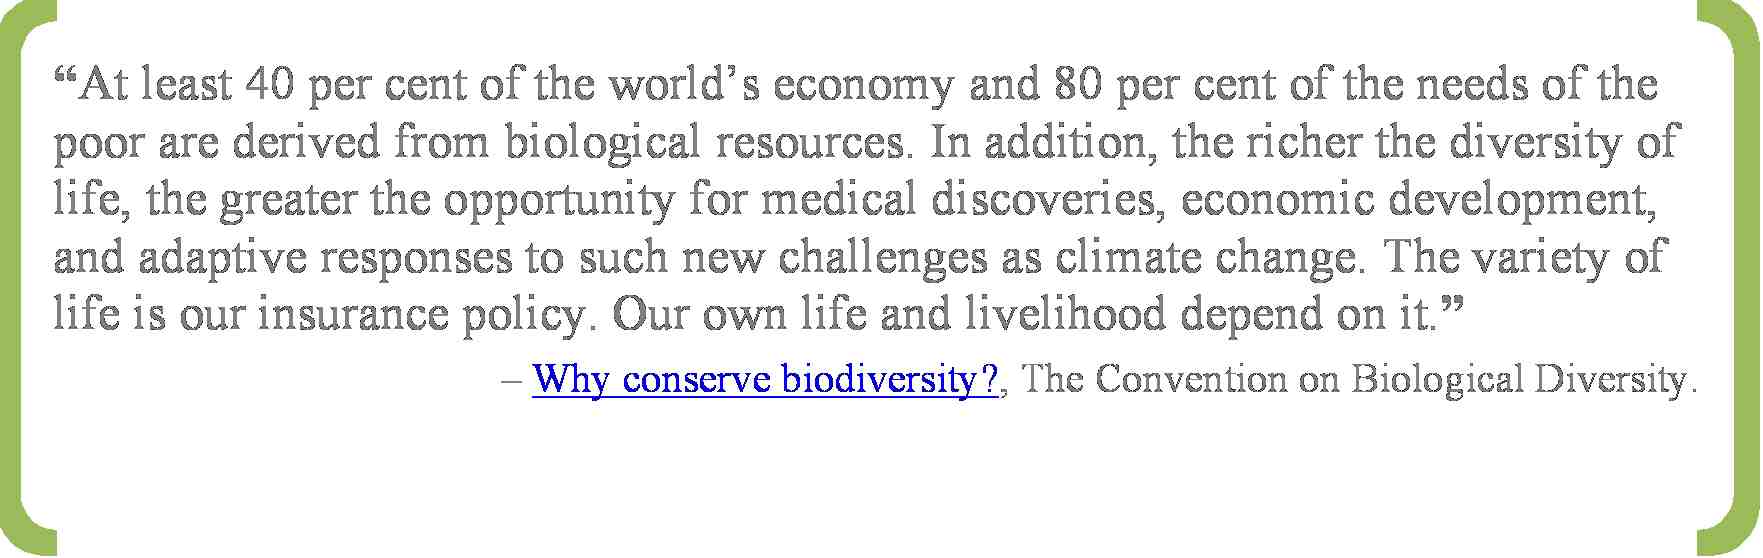 Quote from convention on biodiversity saying At least 40 percent of the world's economy and 80 percent of the needs of the poor are derived biological resources...?